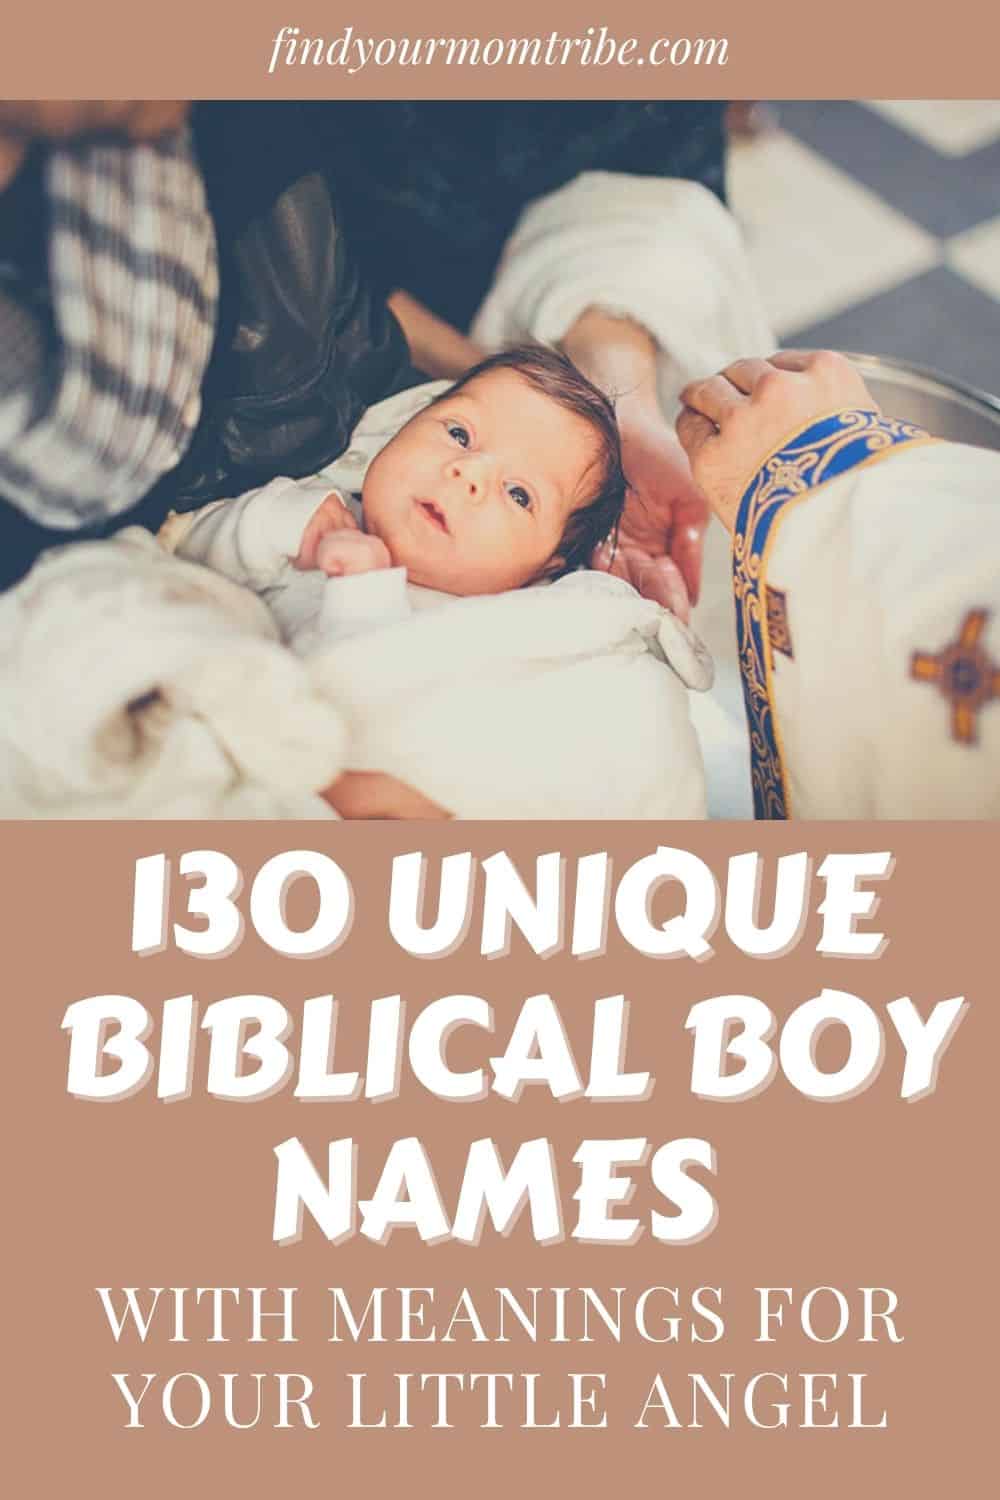 130 Unique Biblical Boy Names With Meanings For Your Little Angel